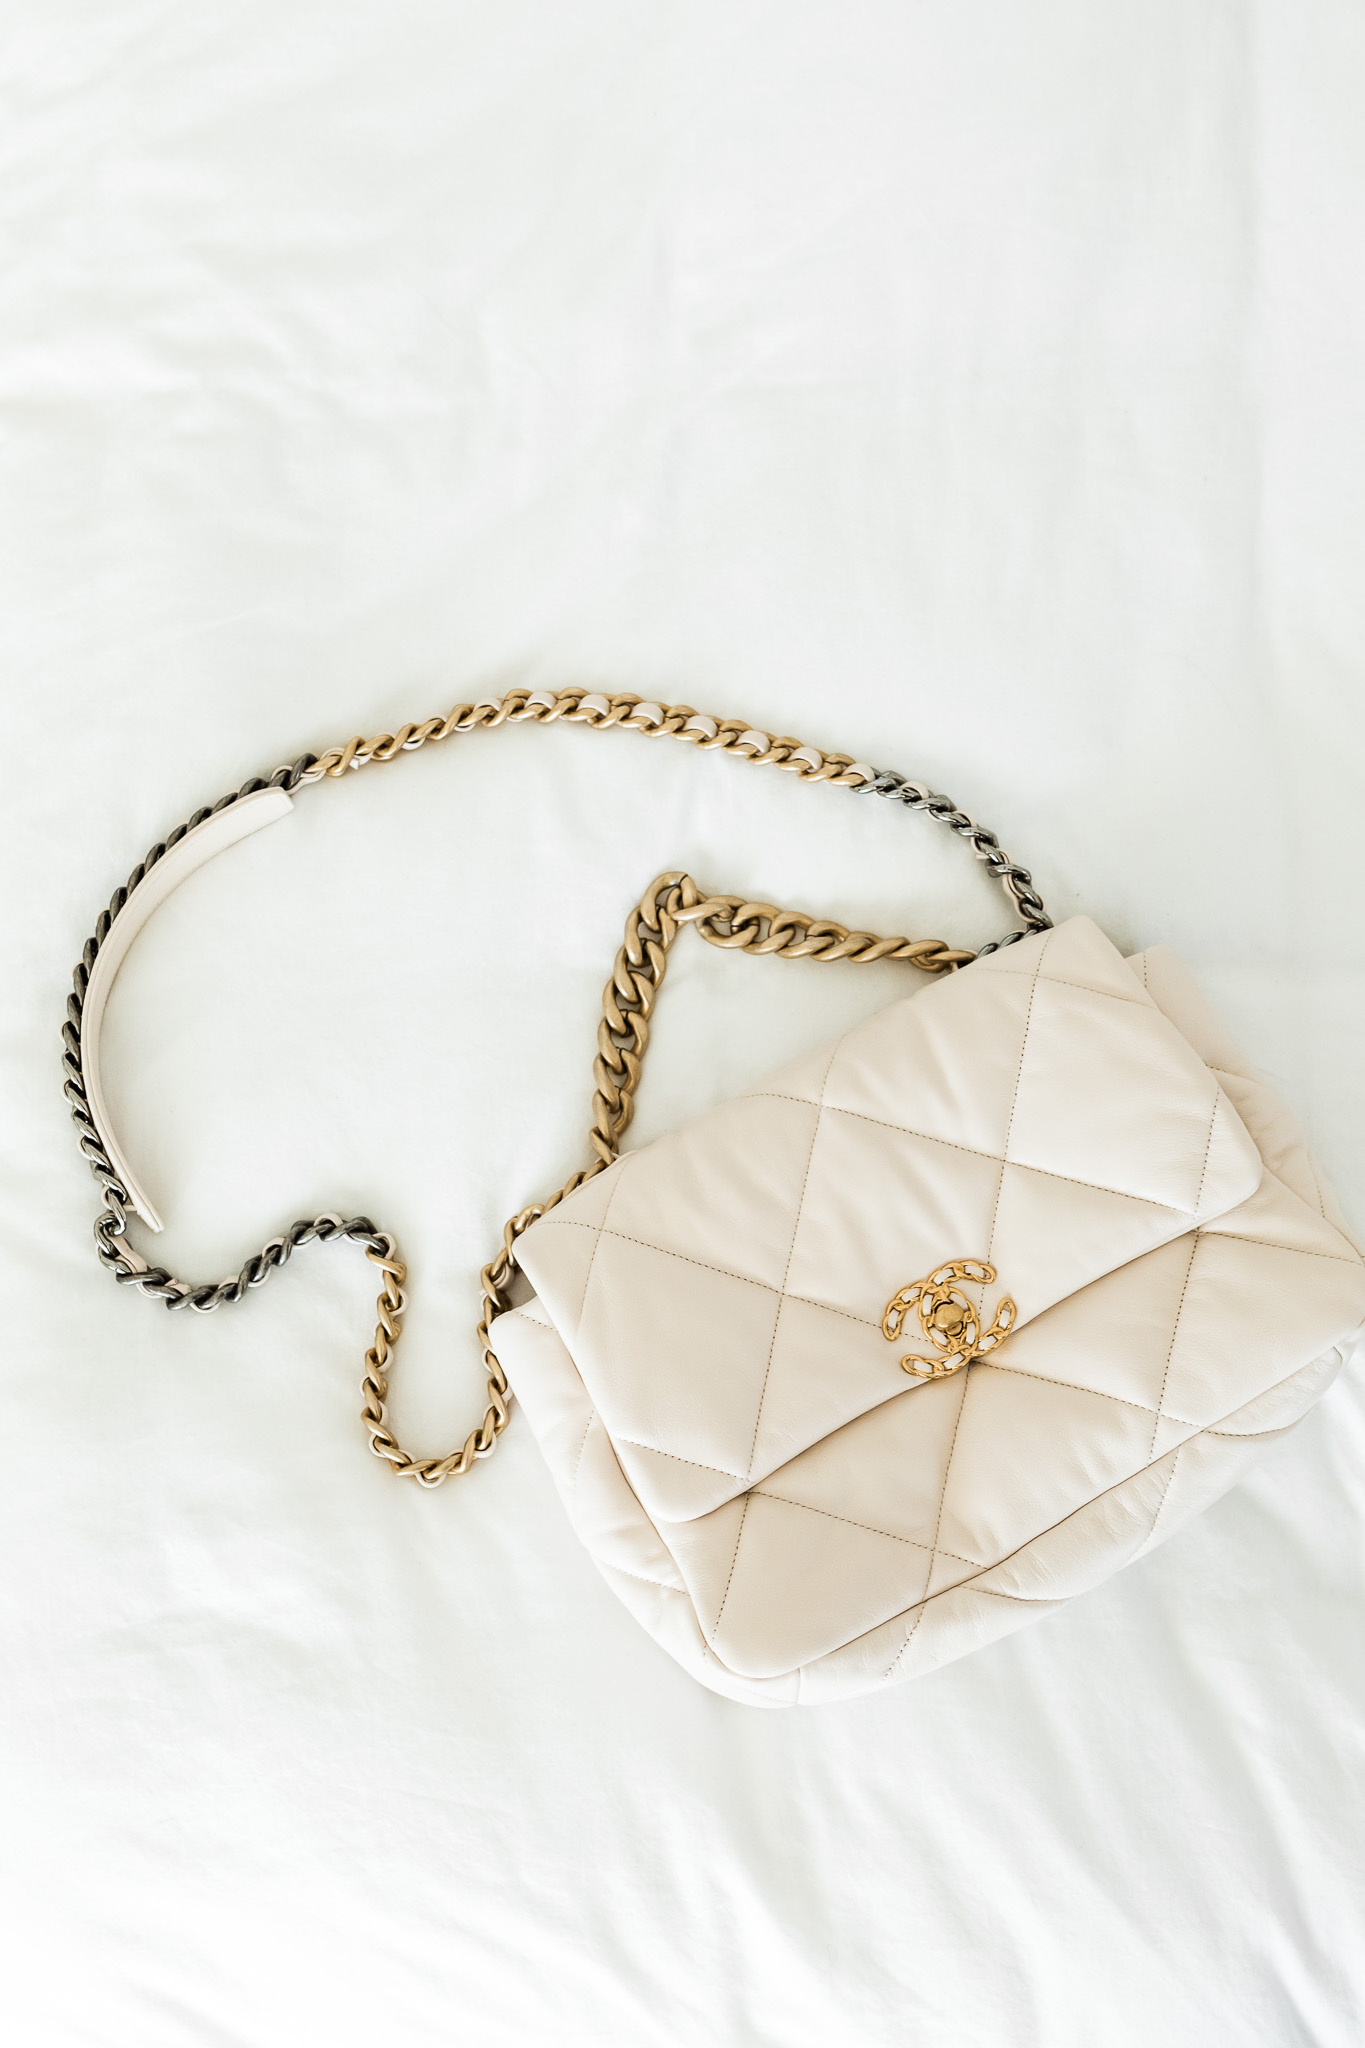 chanel bag with chain handle purse